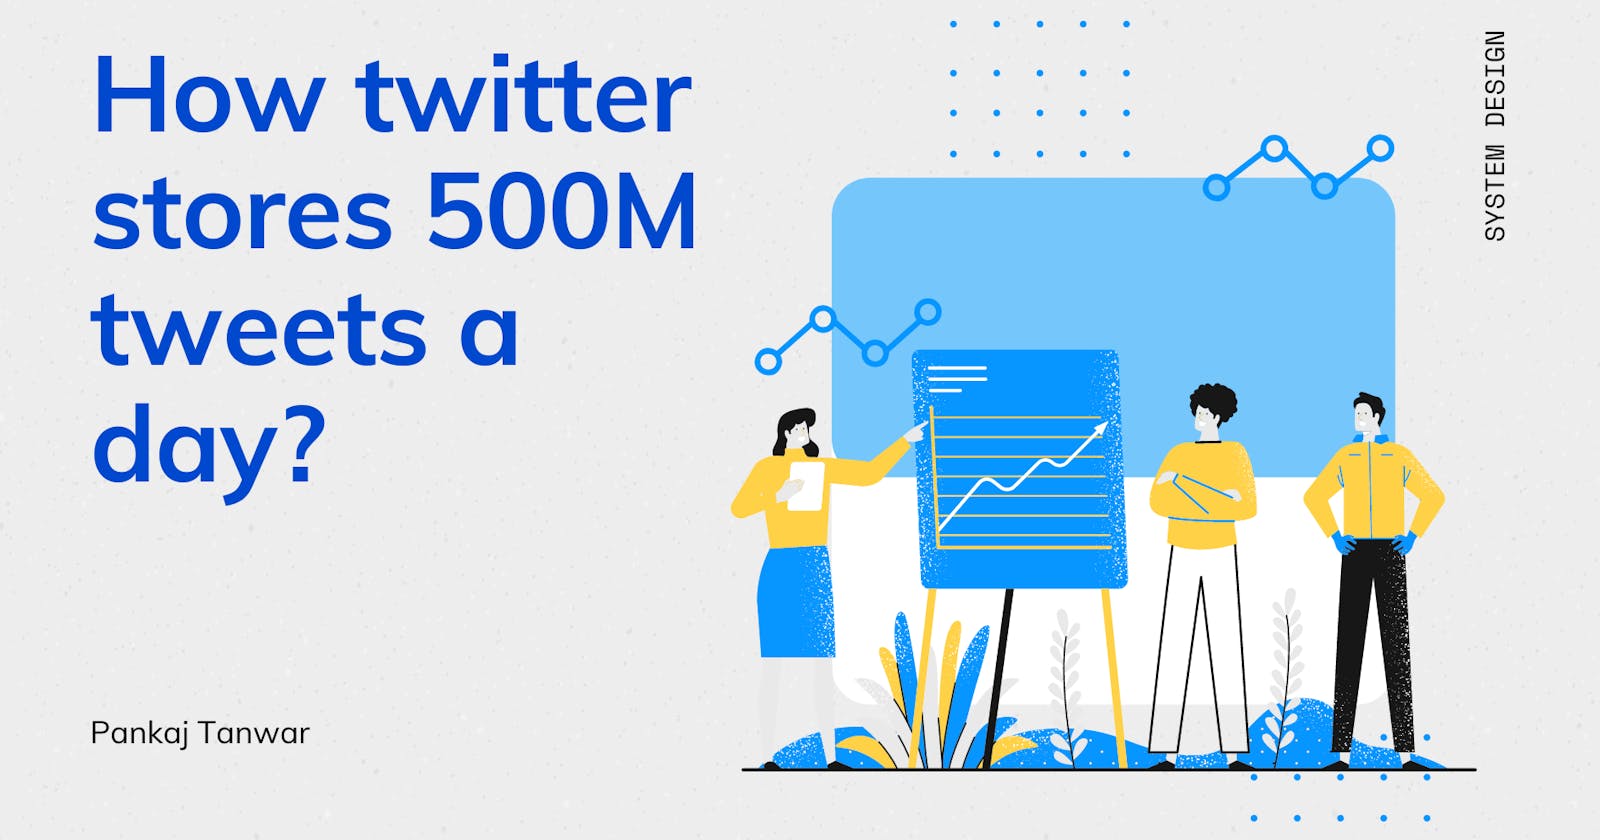 How Twitter stores 500M tweets a day?